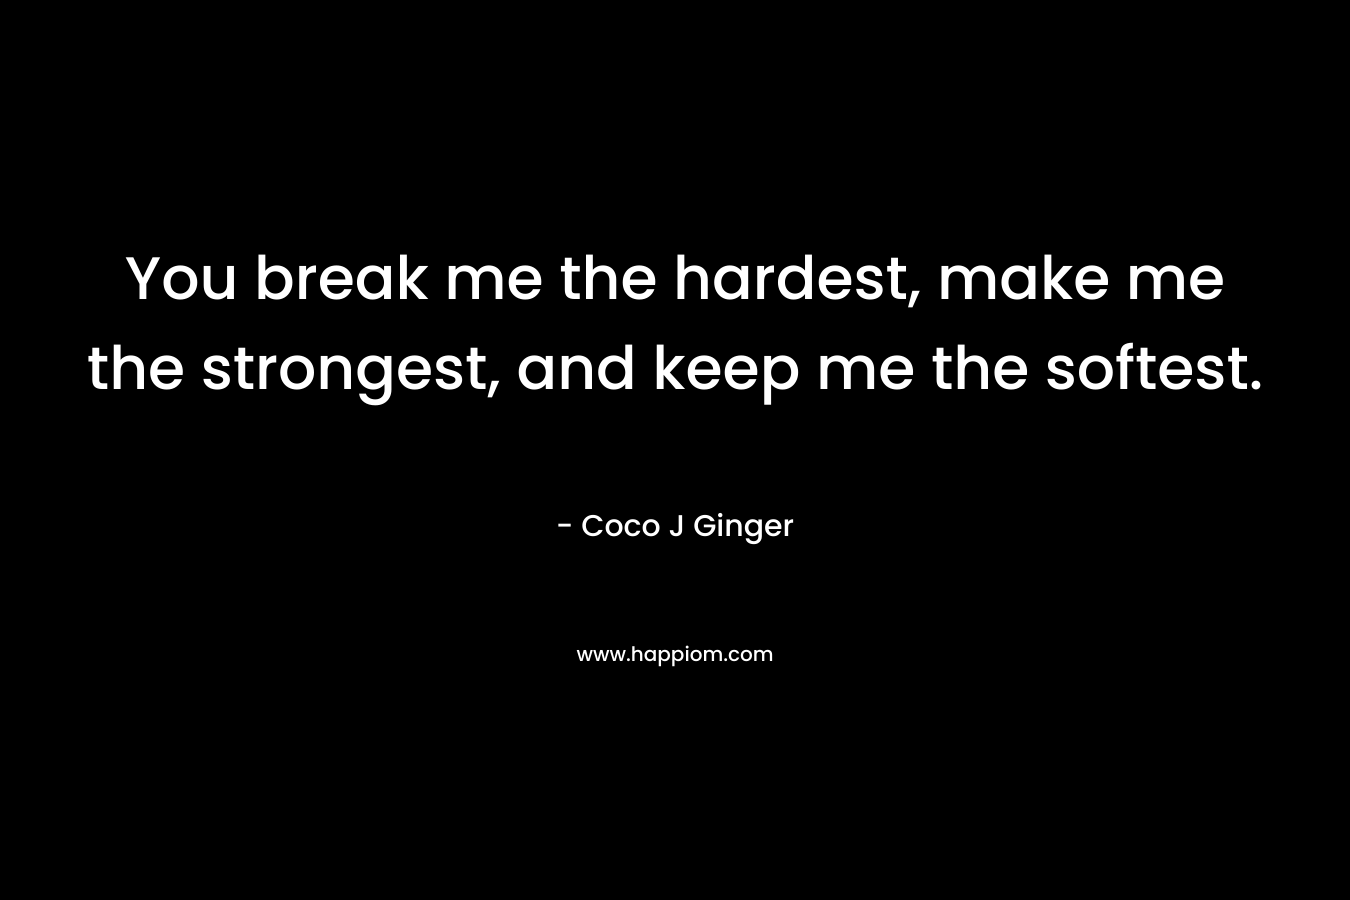 You break me the hardest, make me the strongest, and keep me the softest. – Coco J Ginger